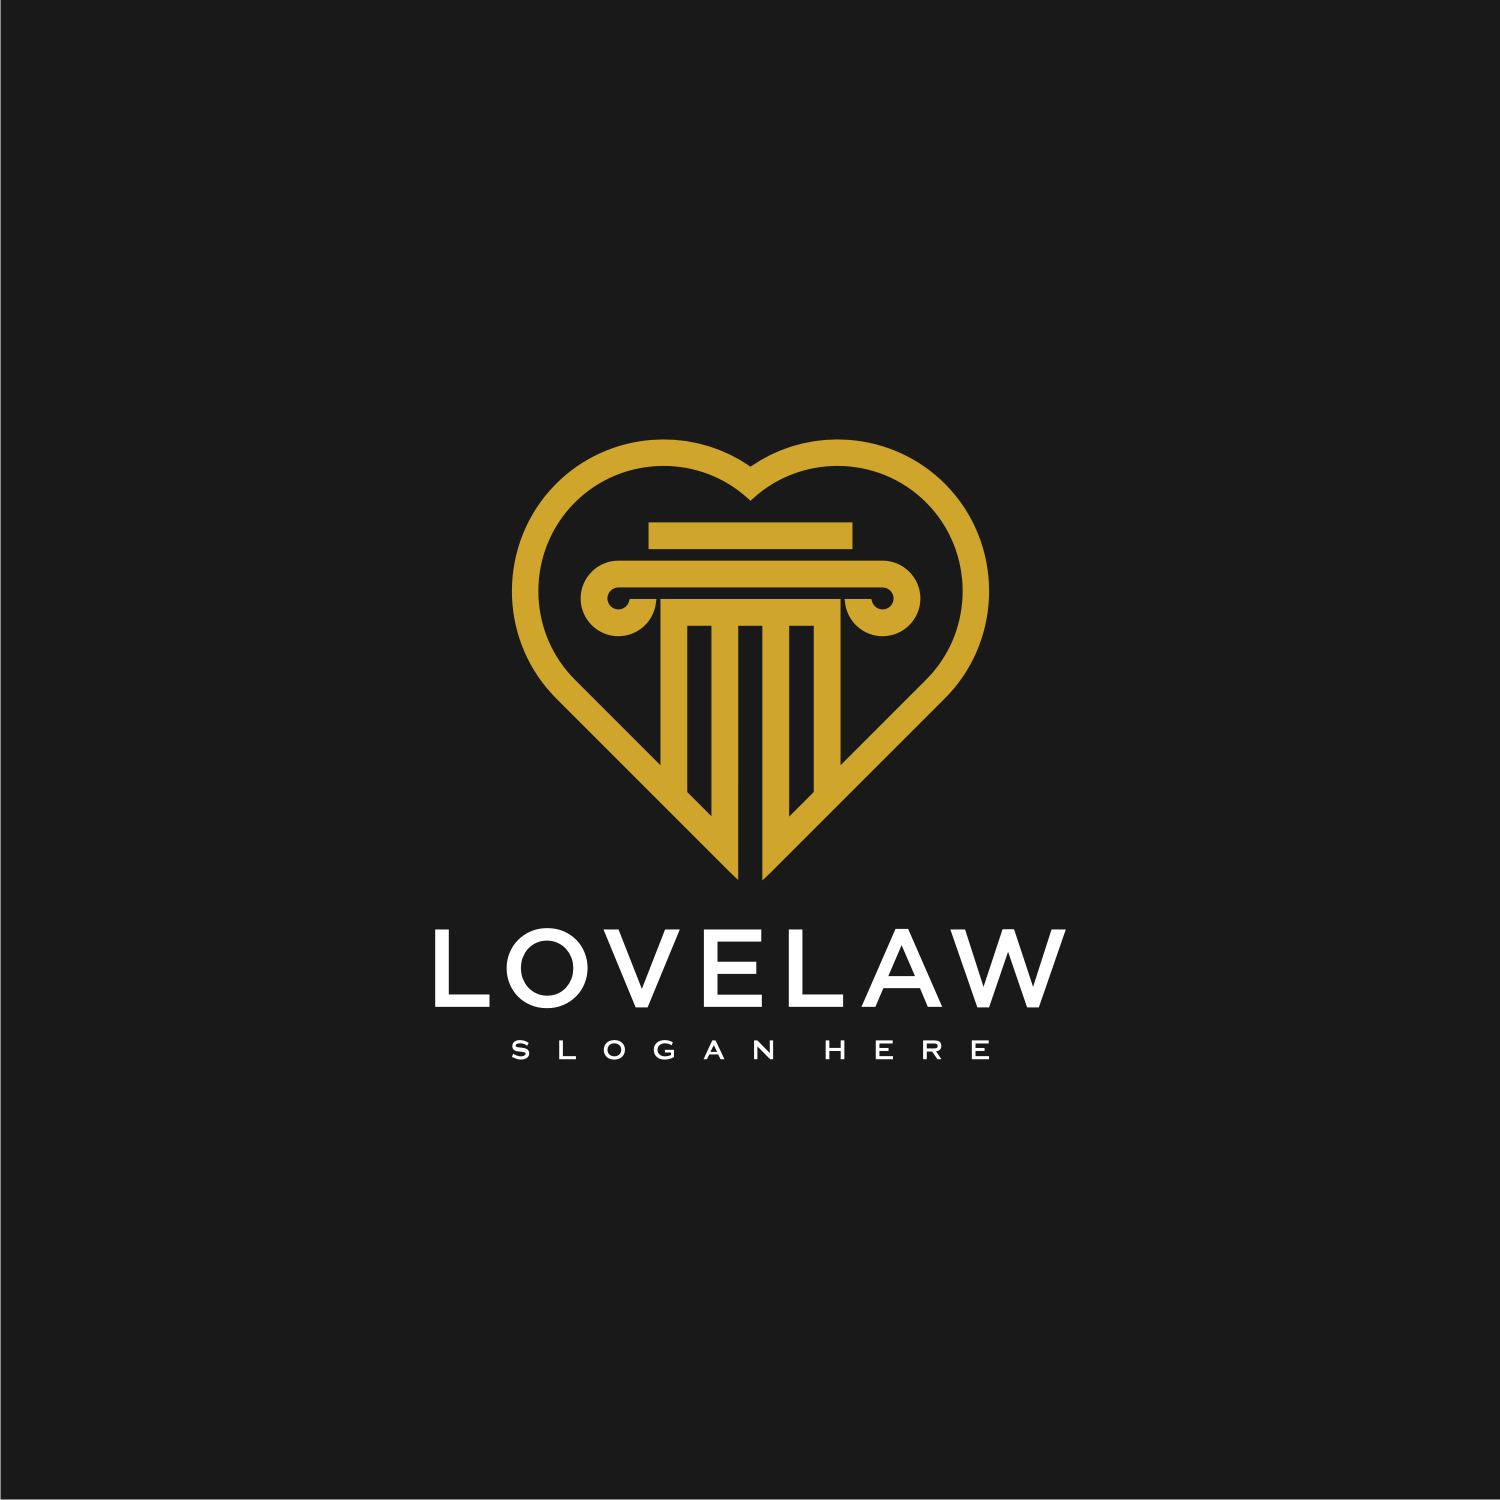 Love and Law Firm Logo Vector Design